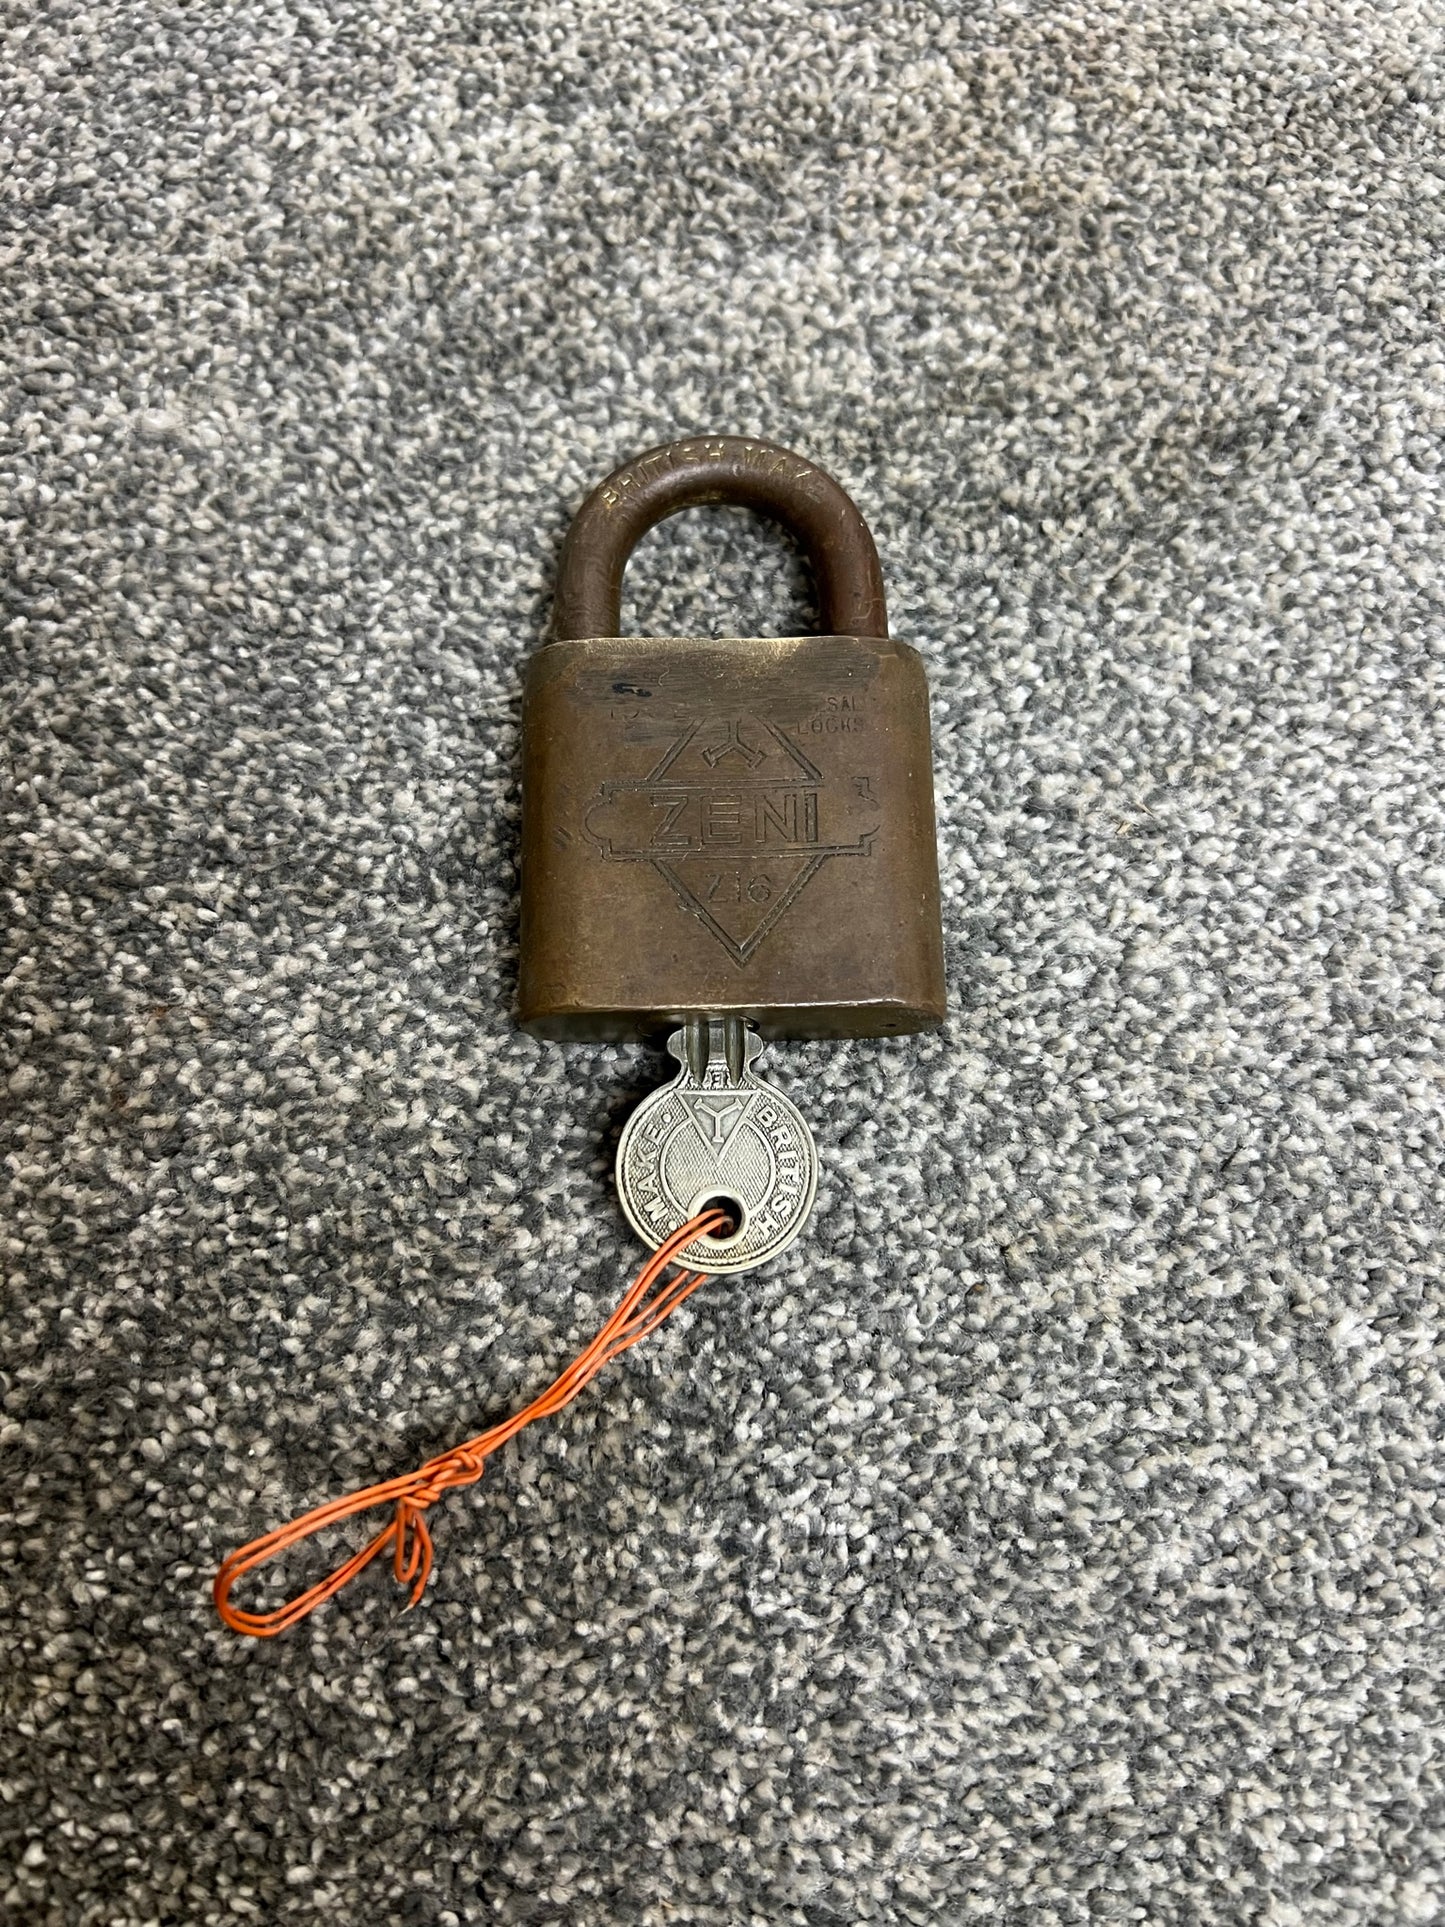 Vintage Walsall Zeni Z16 Brass Padlock Made In England - Working with Key